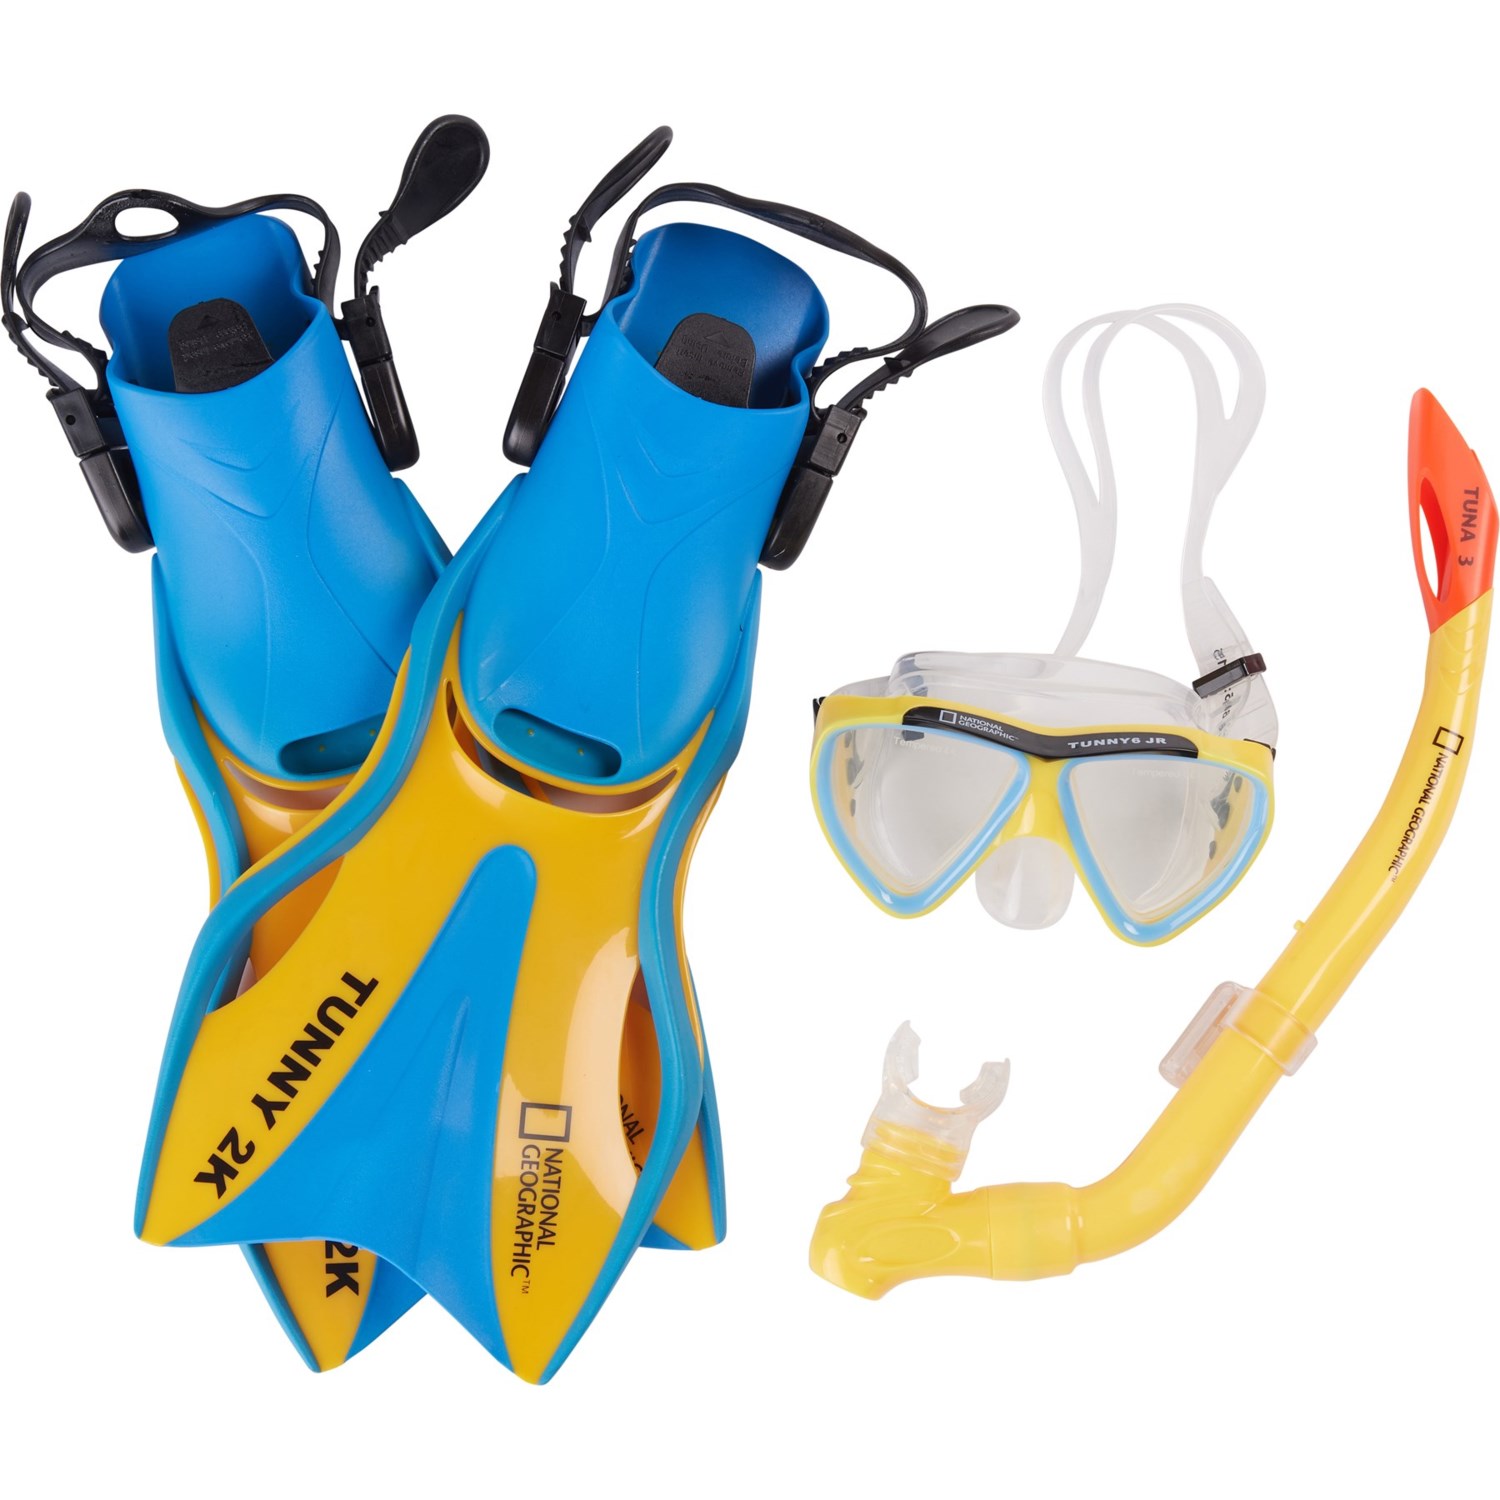 National Geographic Tunny 2 Snorkeling Set (For Boys and Girls) - Save 53%